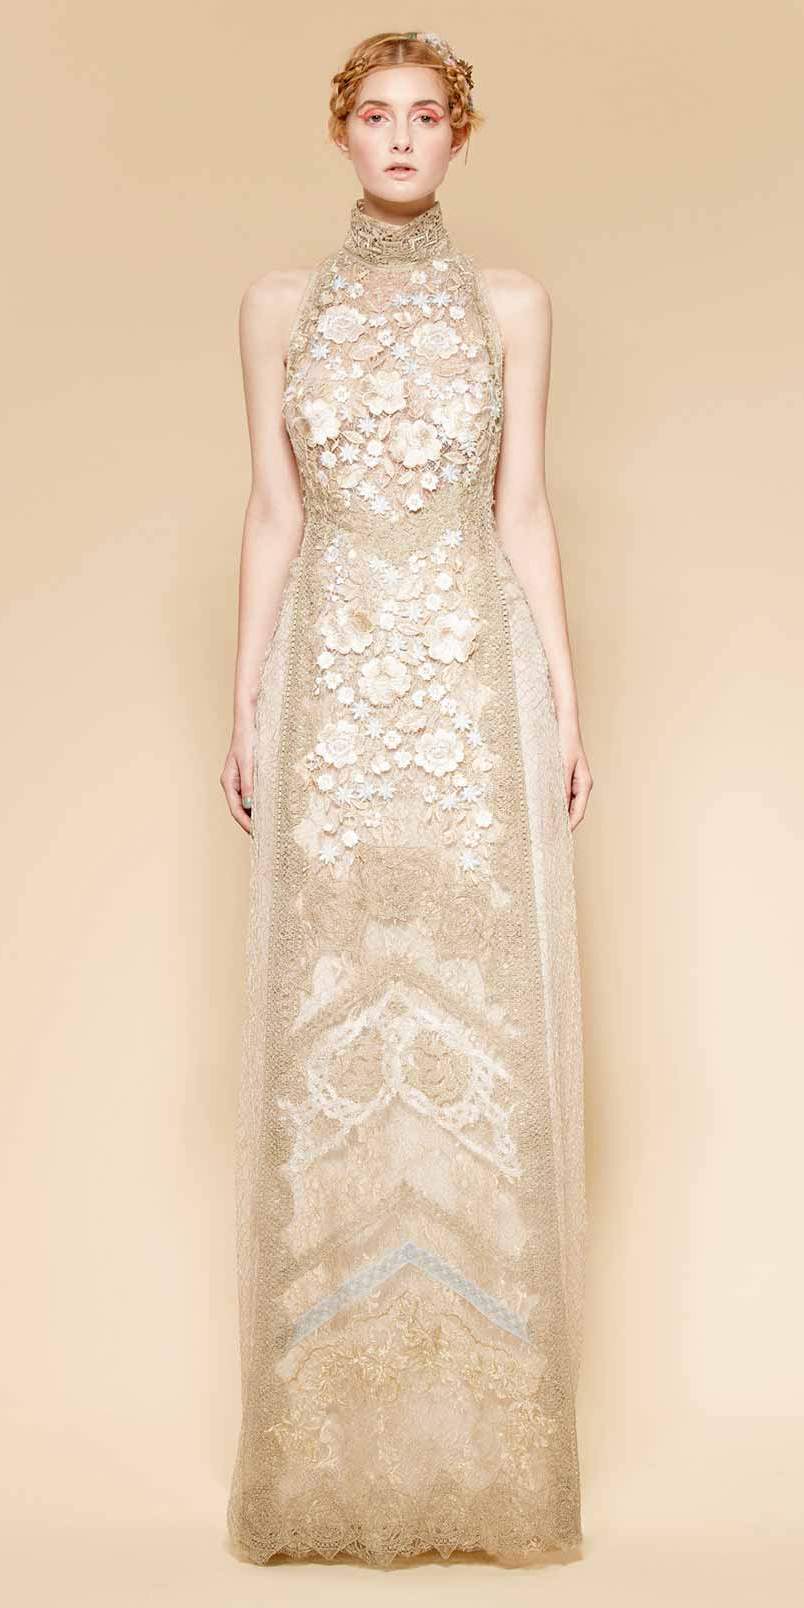 Long evening dress made of nude and gold laces. High neck and open back